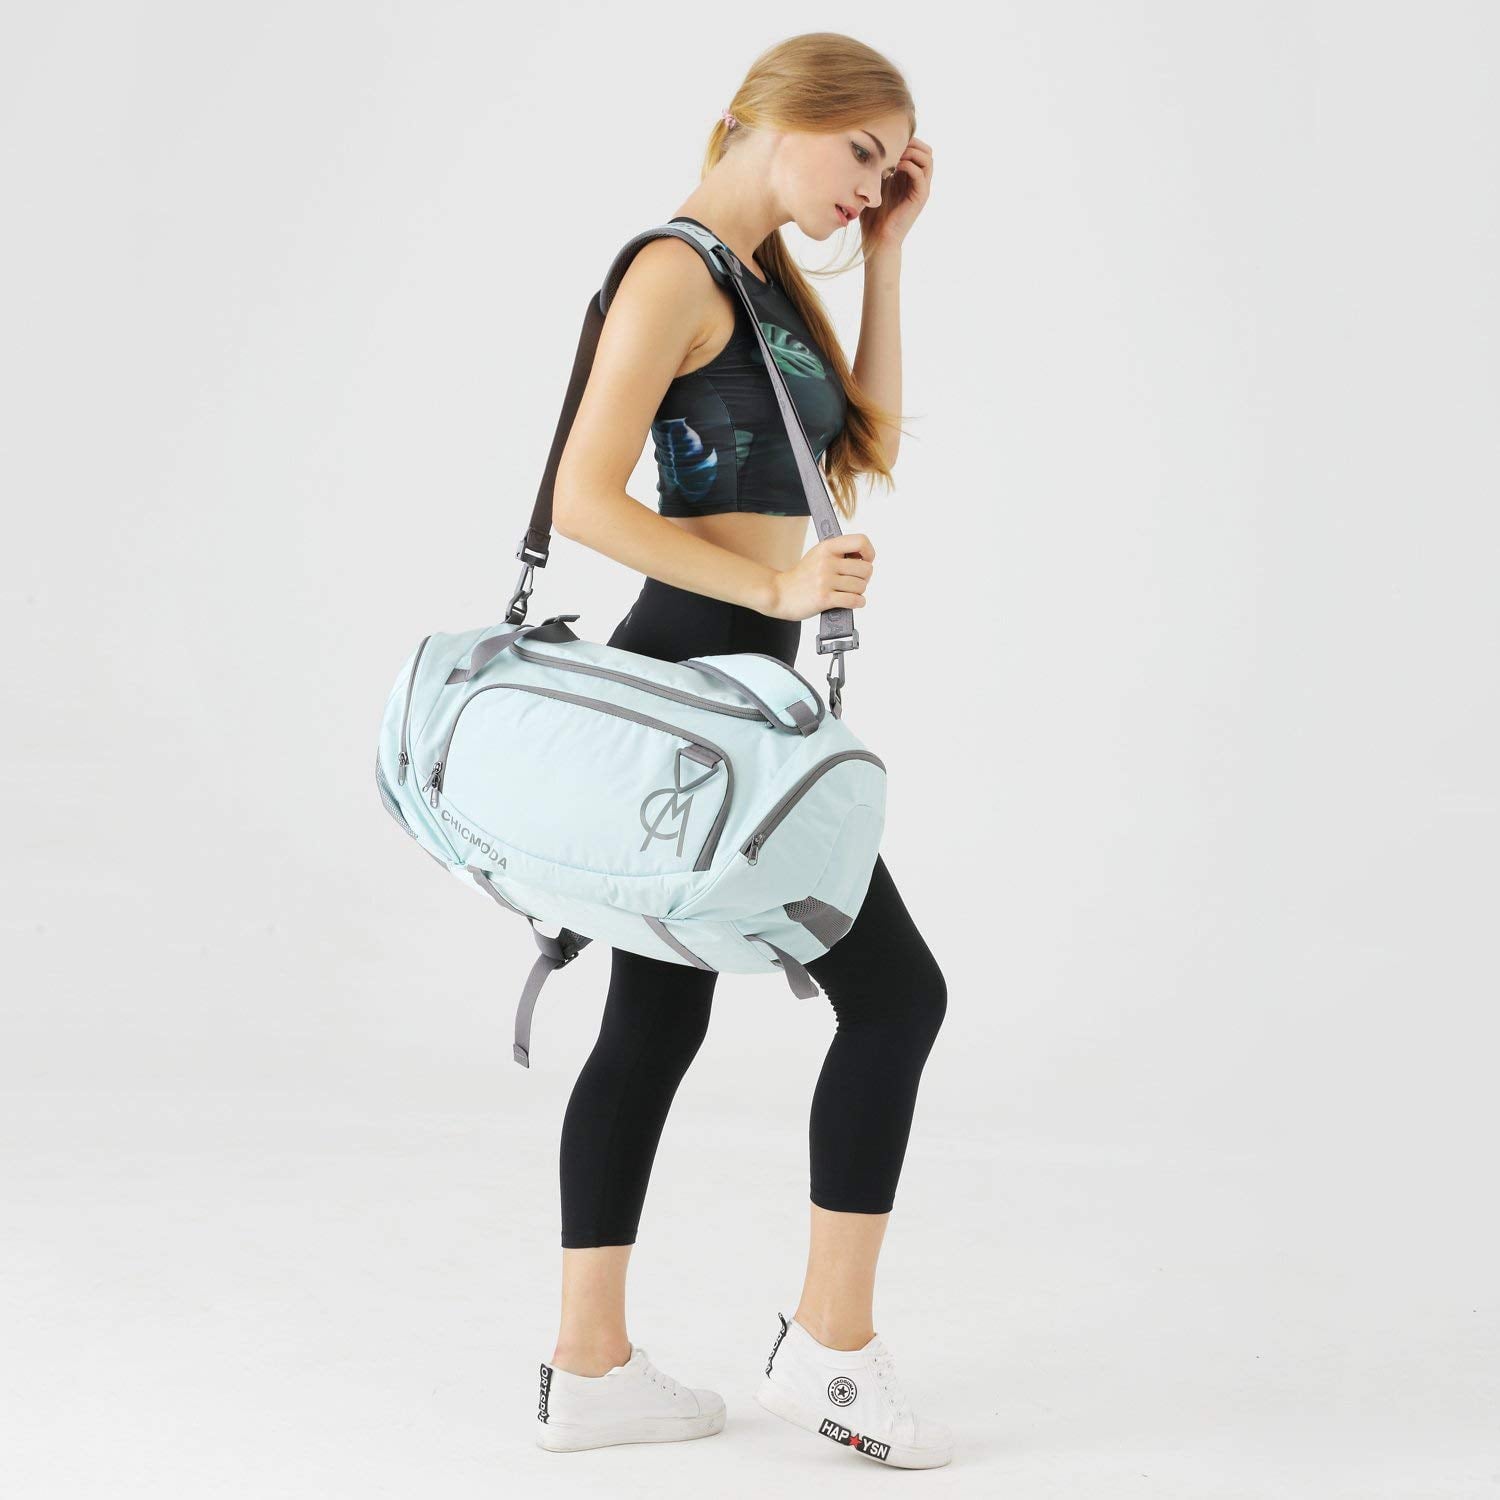 10 Best Gym Bags for Women 2018 - Cute Sports Backpacks and Duffle